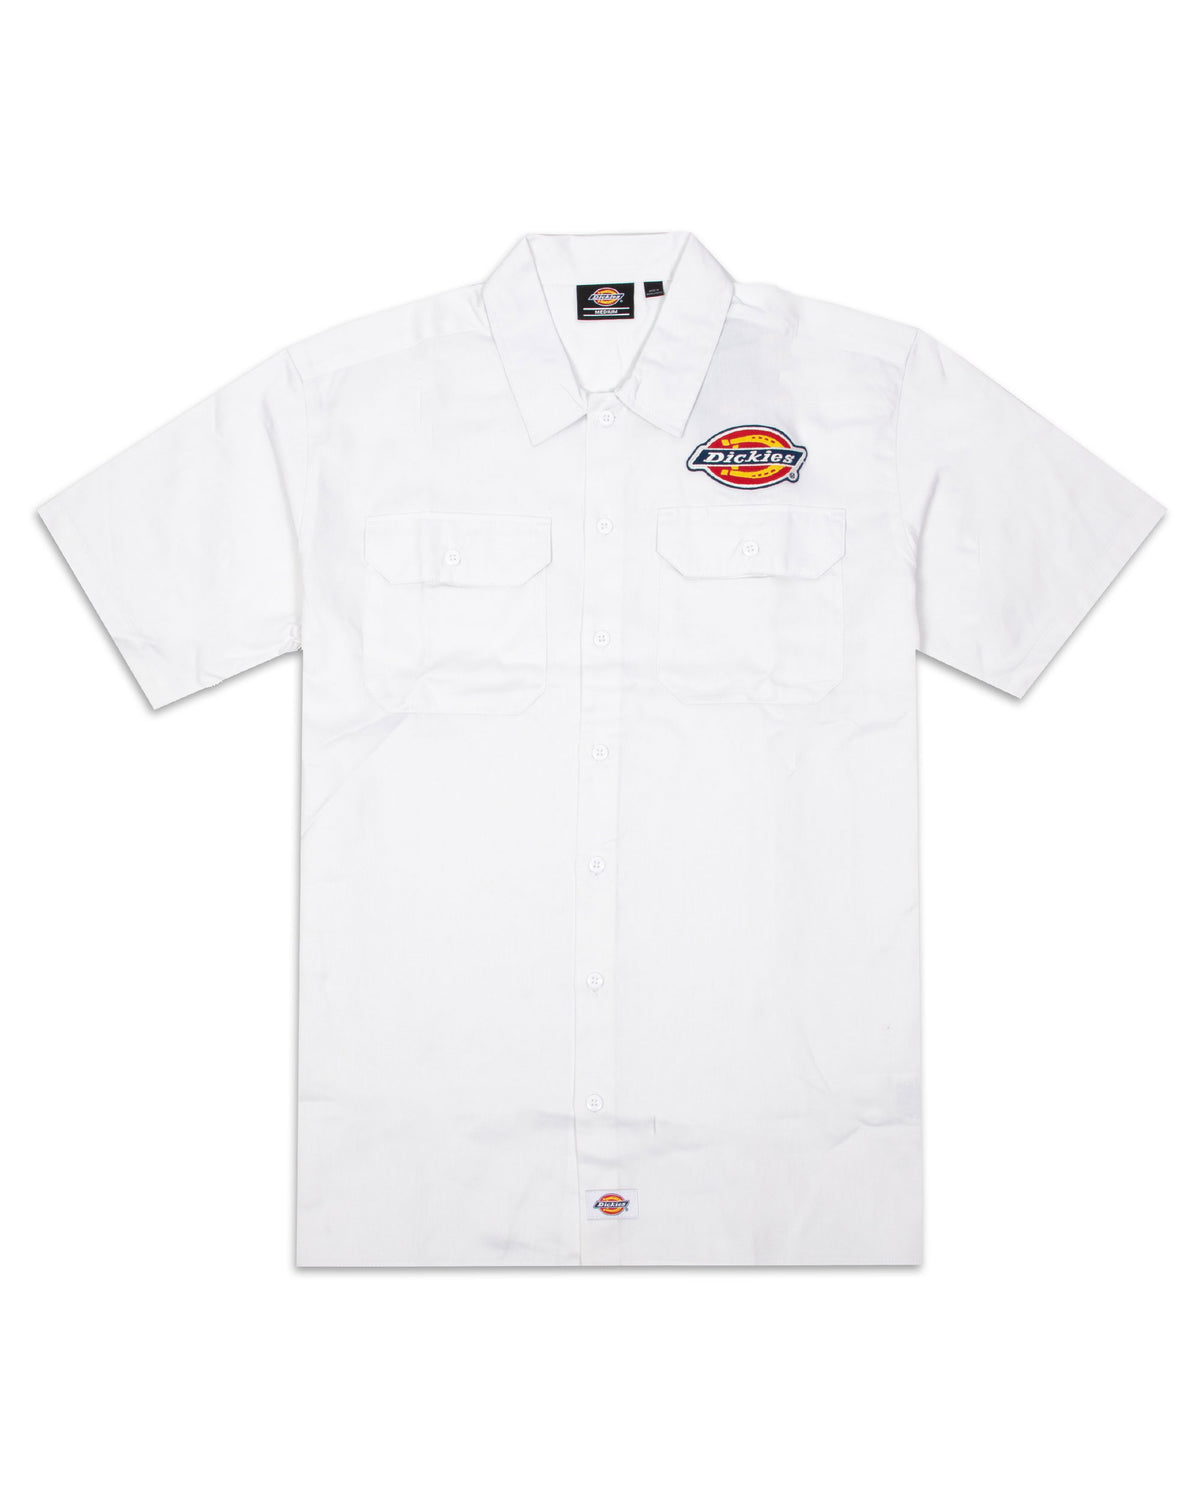 Man Shirt Dickies Clintodale White